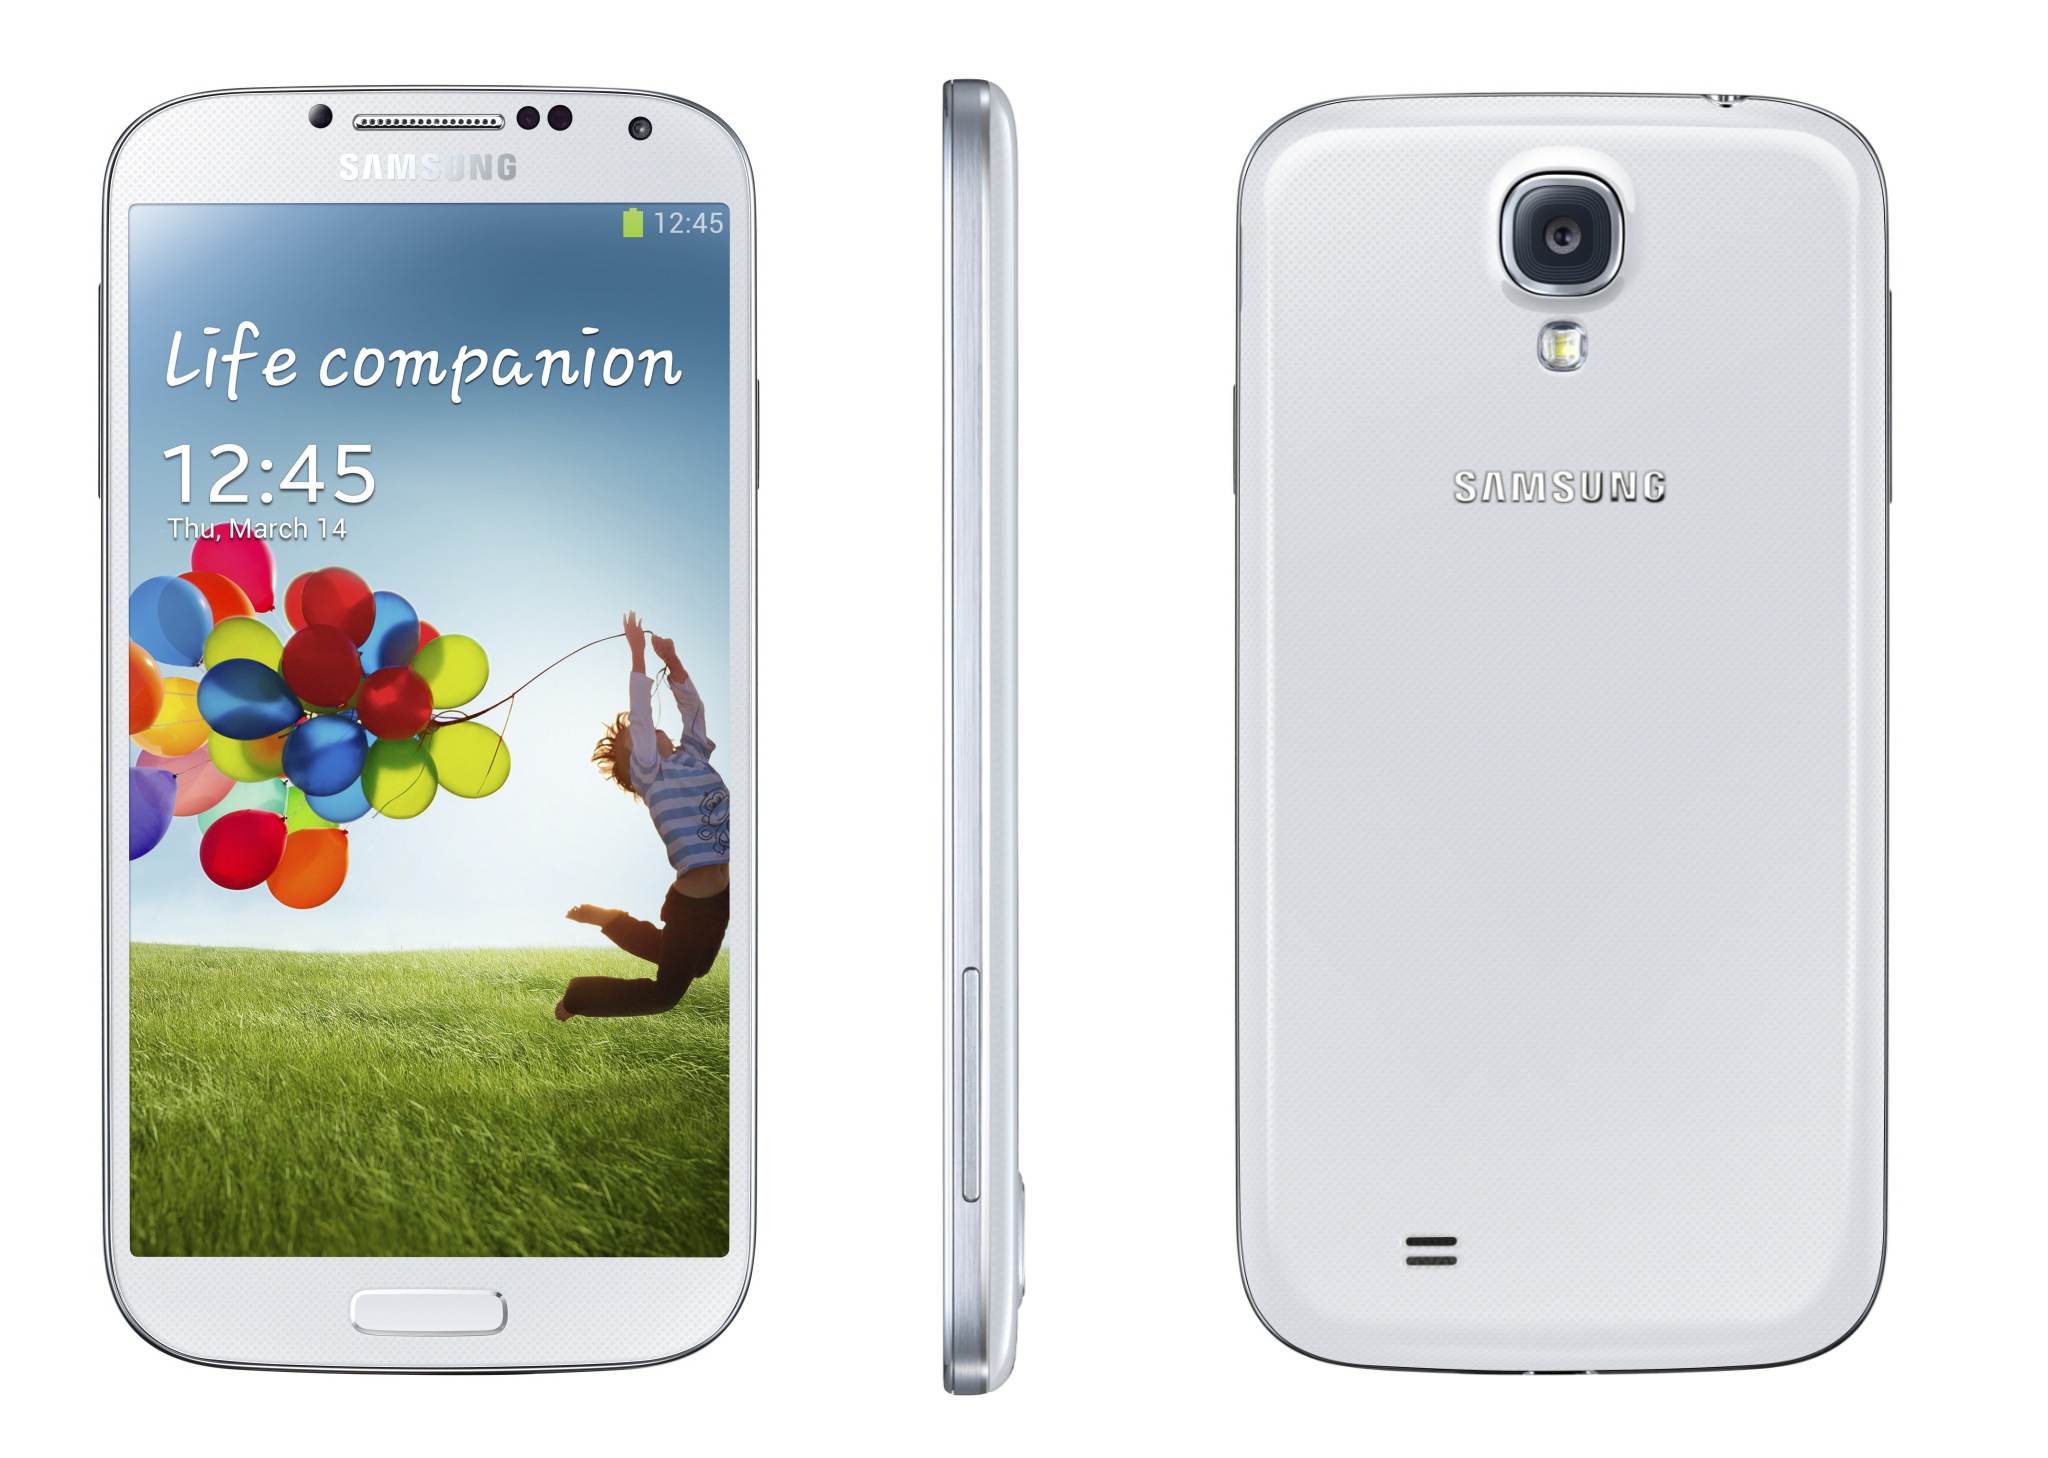 Samsung Galaxy S 4 (white, three up, front, profile, back)